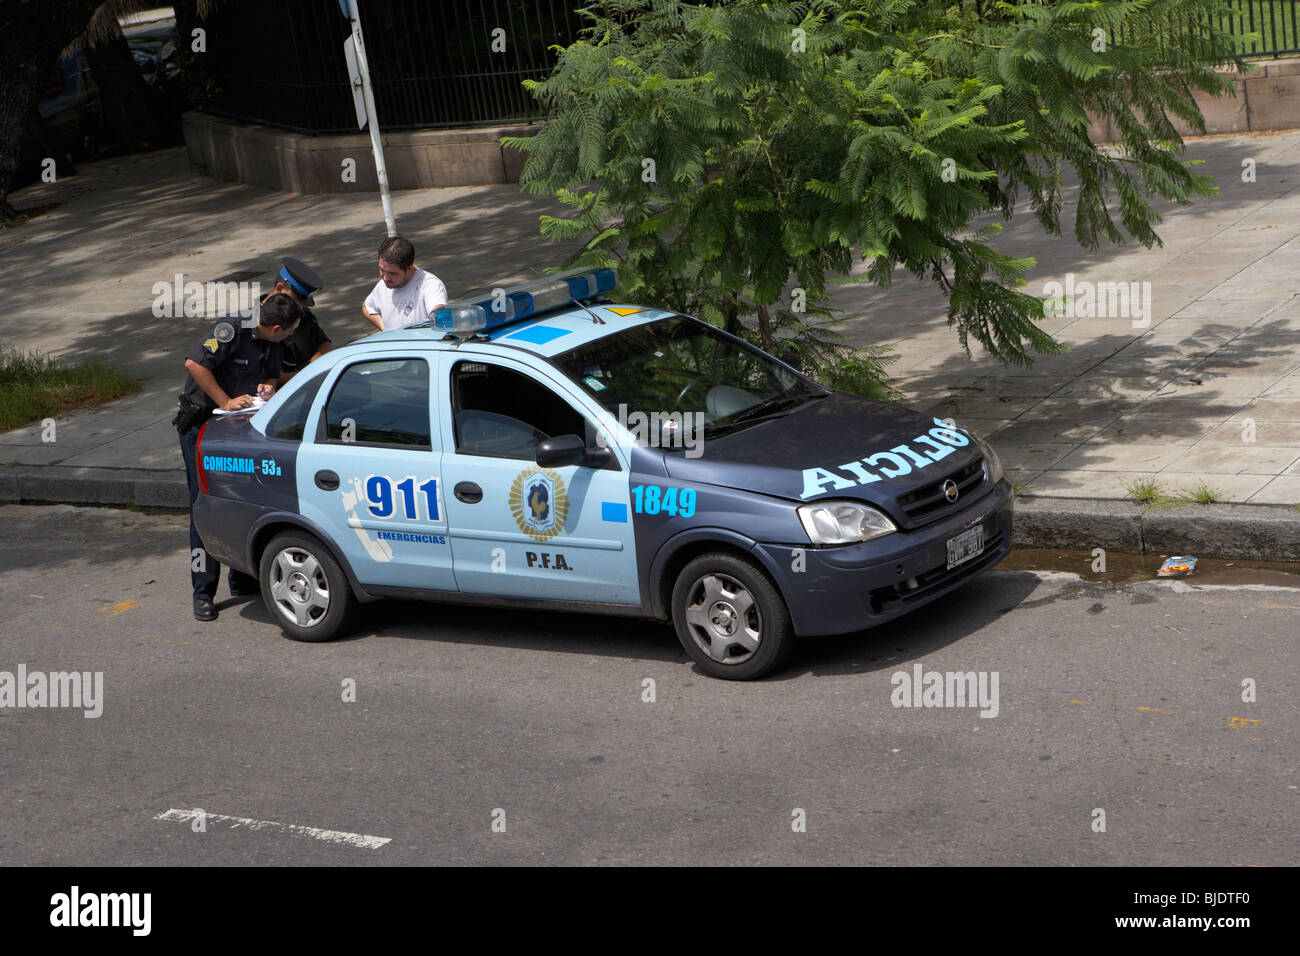 policia police car stop and question another driver in capital federal buenos aires republic of argentina south america Stock Photo